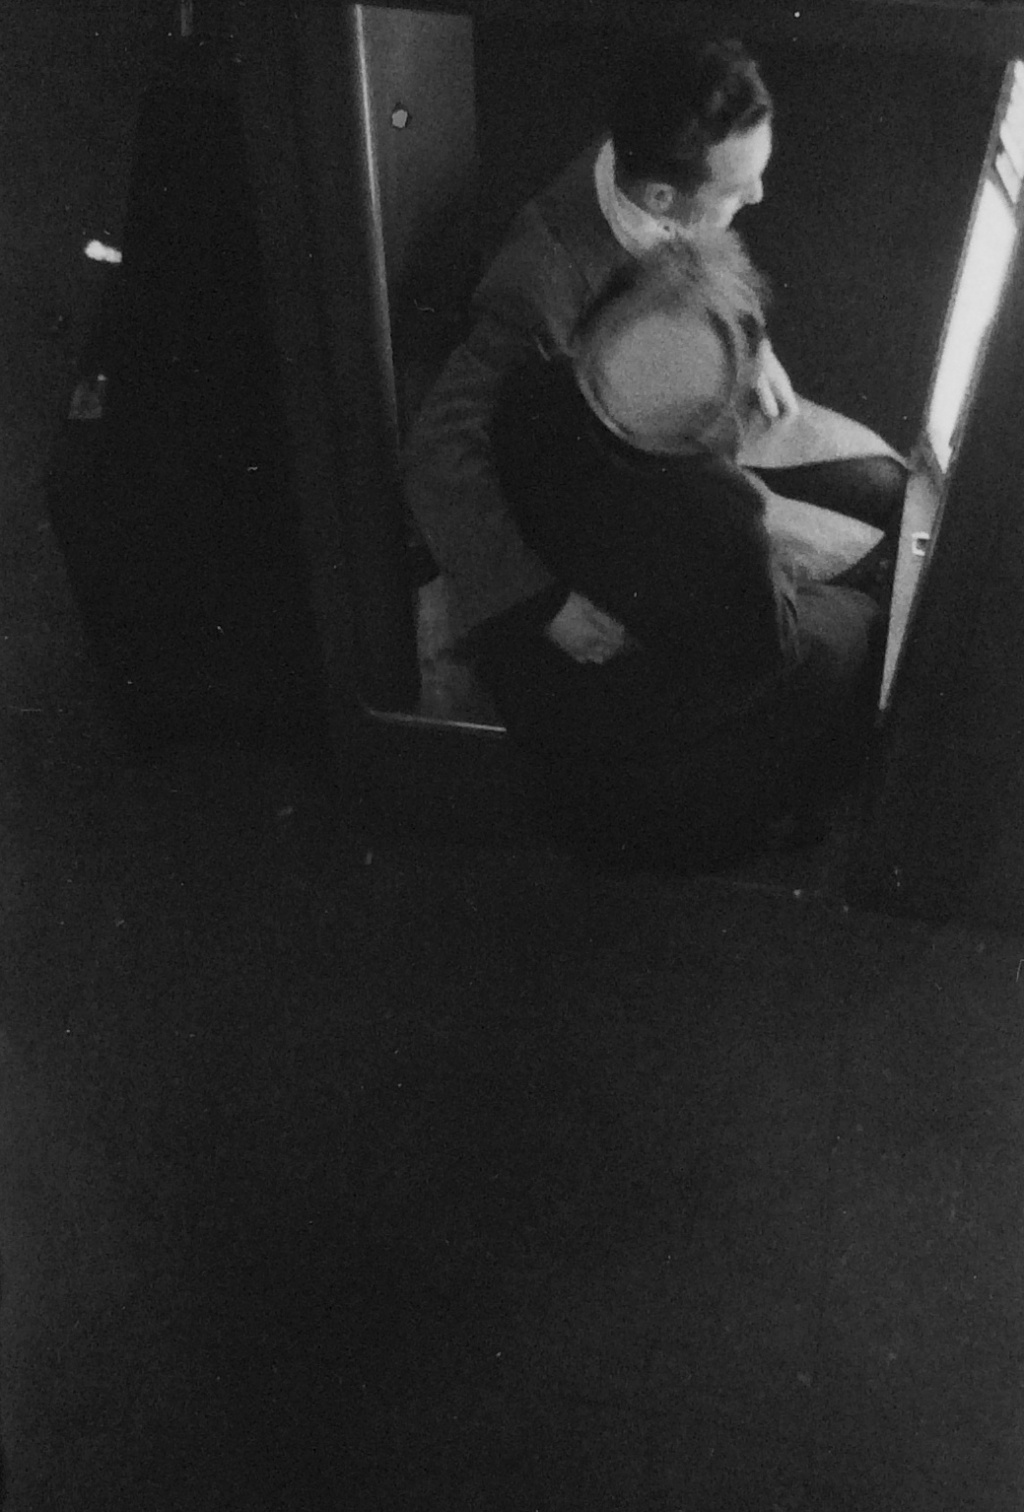 Saul Leiter, At the Photo Booth, 1940s
Vintage gelatin silver print, printed on Kodak Photo Post Card Paper,  1970s
14 x 9 cm 
Signed by photographer verso